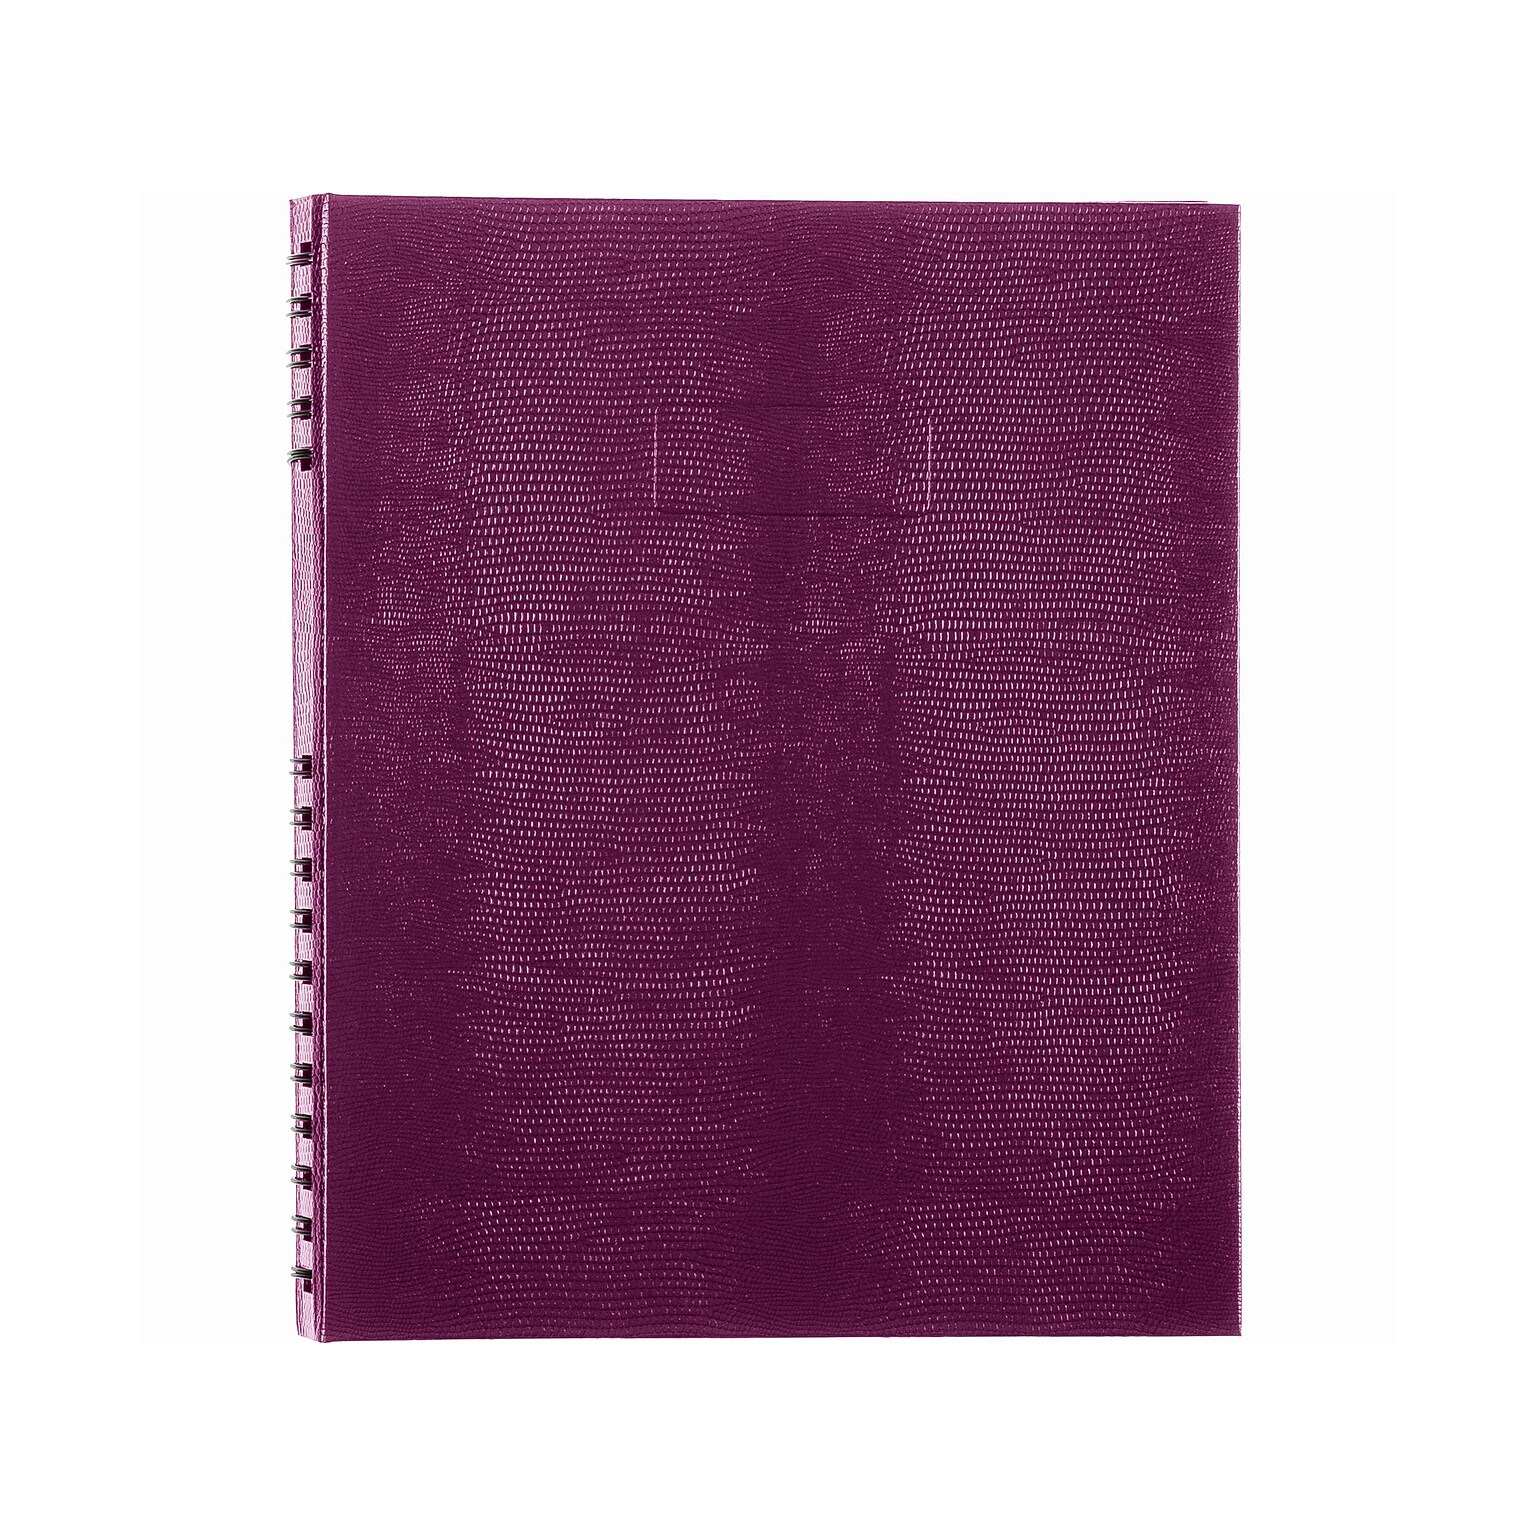 Blueline NotePro Hardcover Executive Journal, 8.5 x 10.75, Wide-Ruled, Grape, 200 Pages (A10200.RAS)